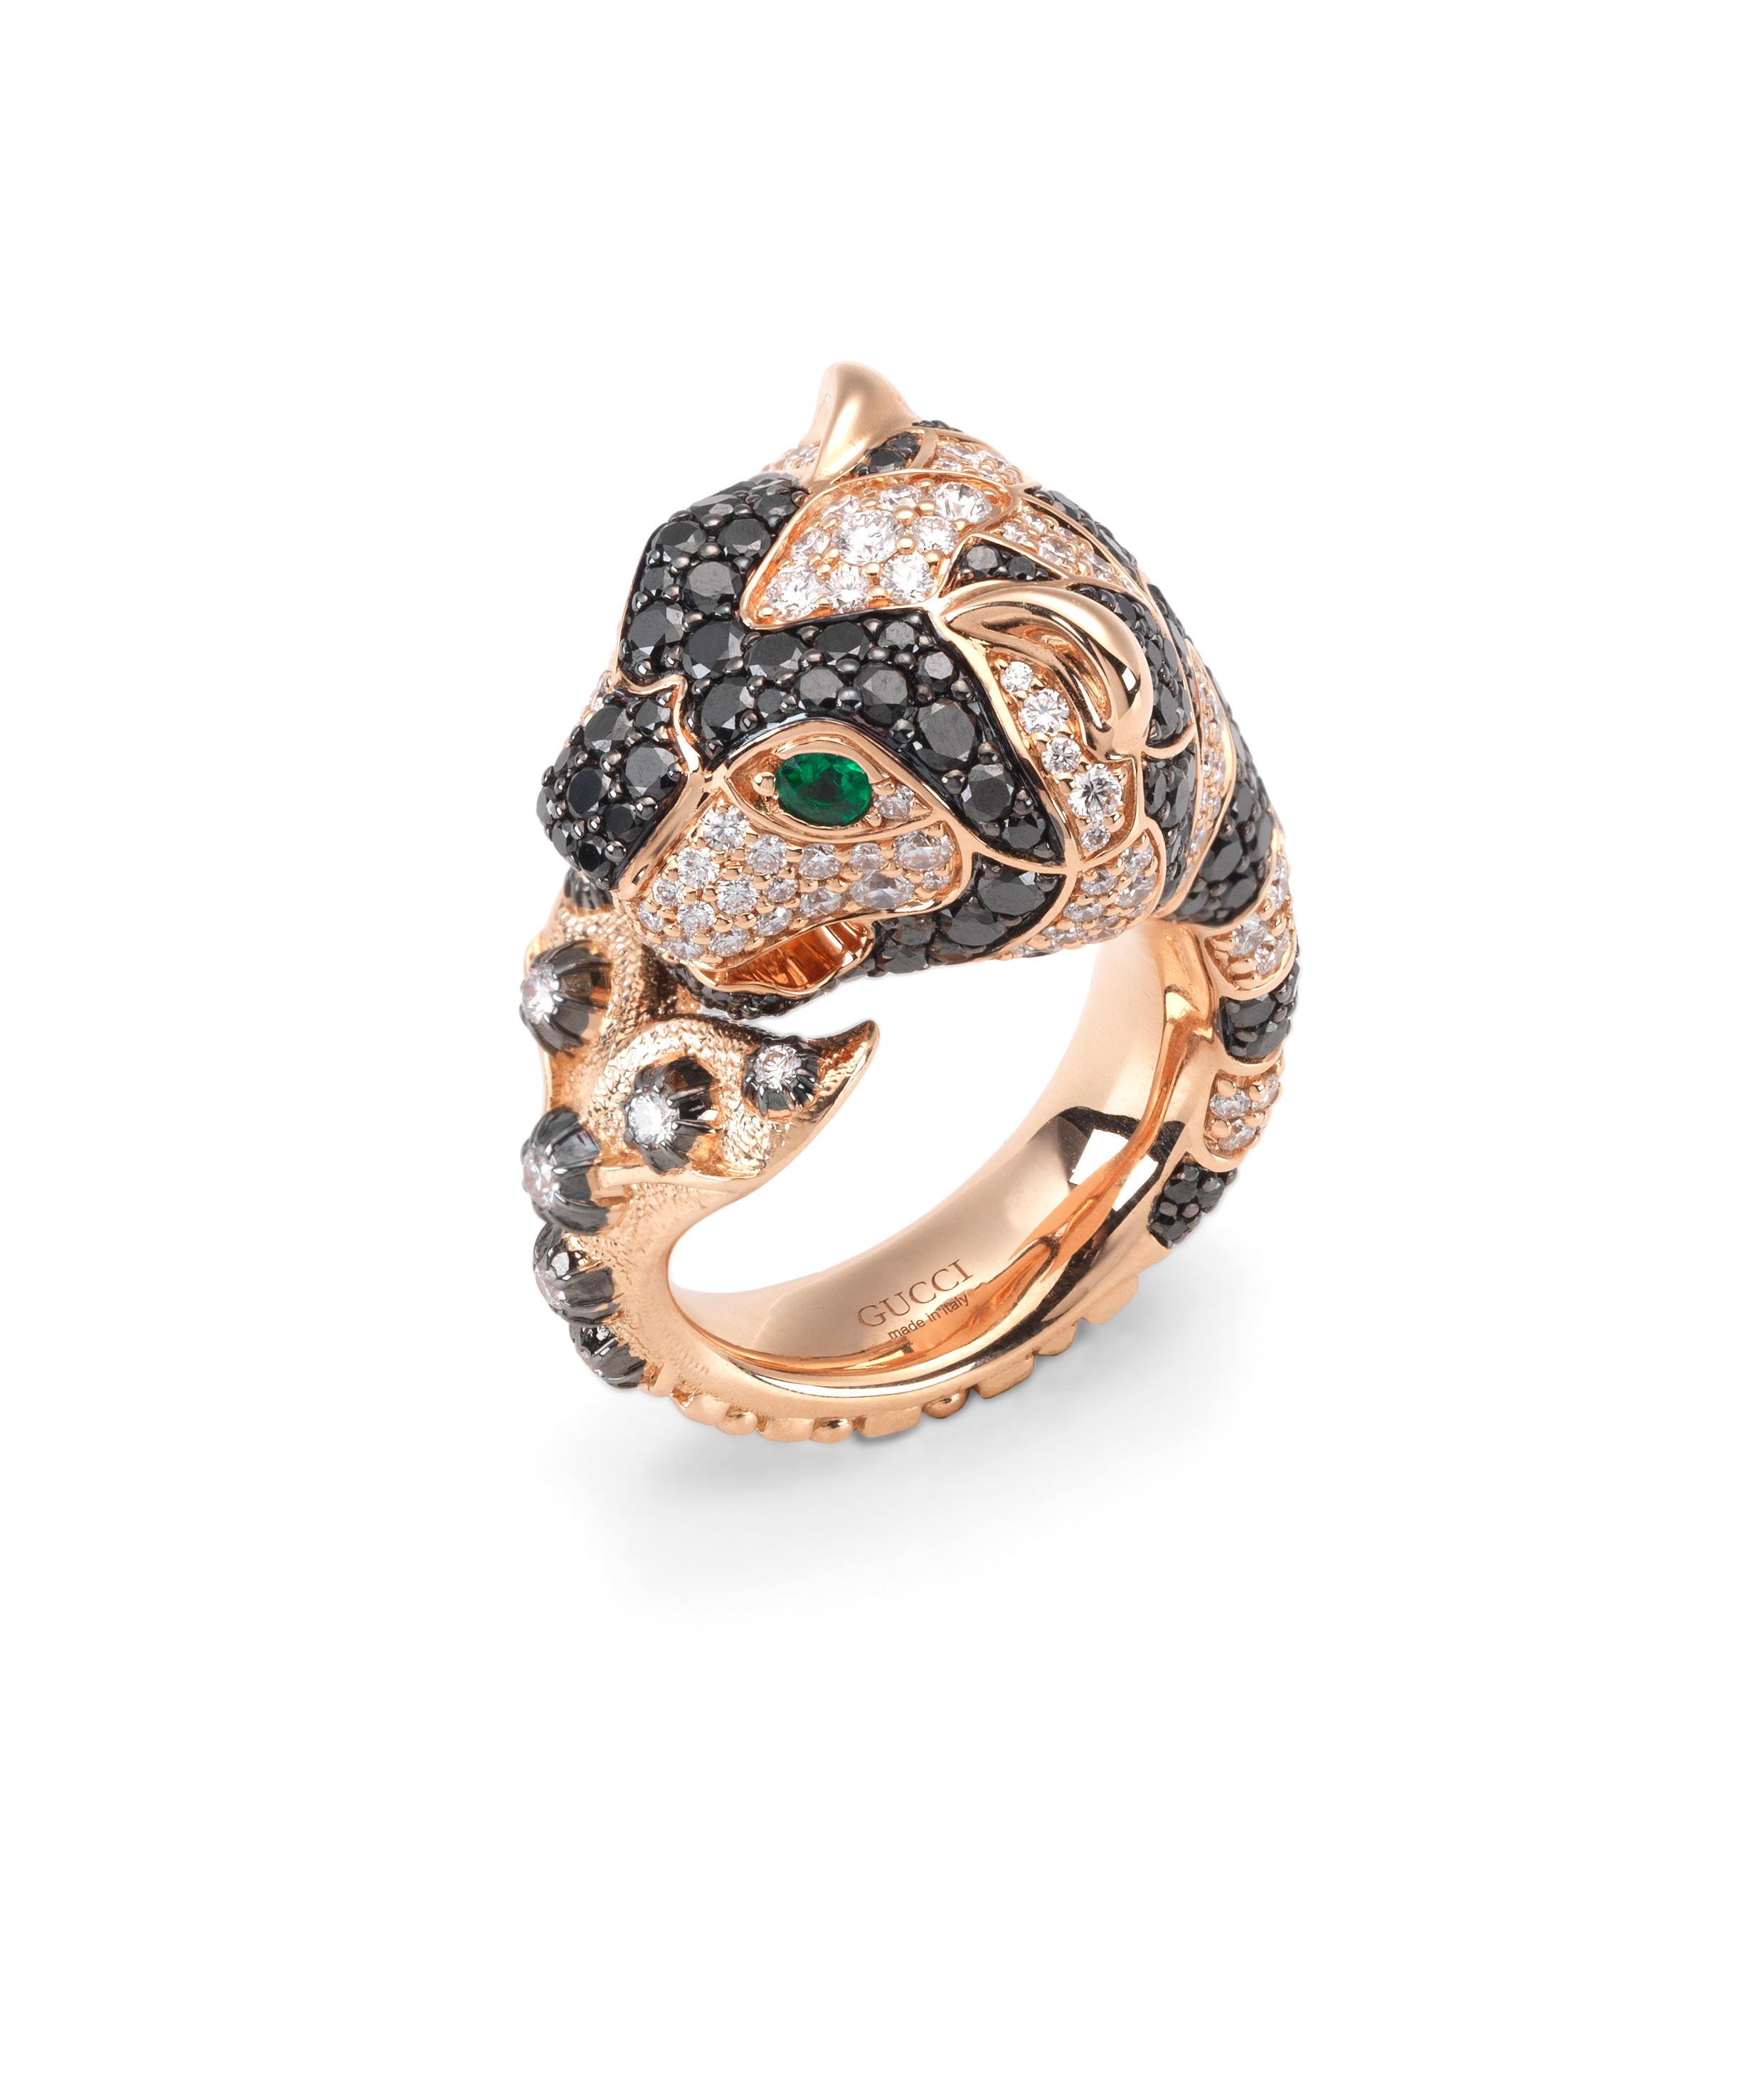 5. Gucci Tiger ring in gold with black 